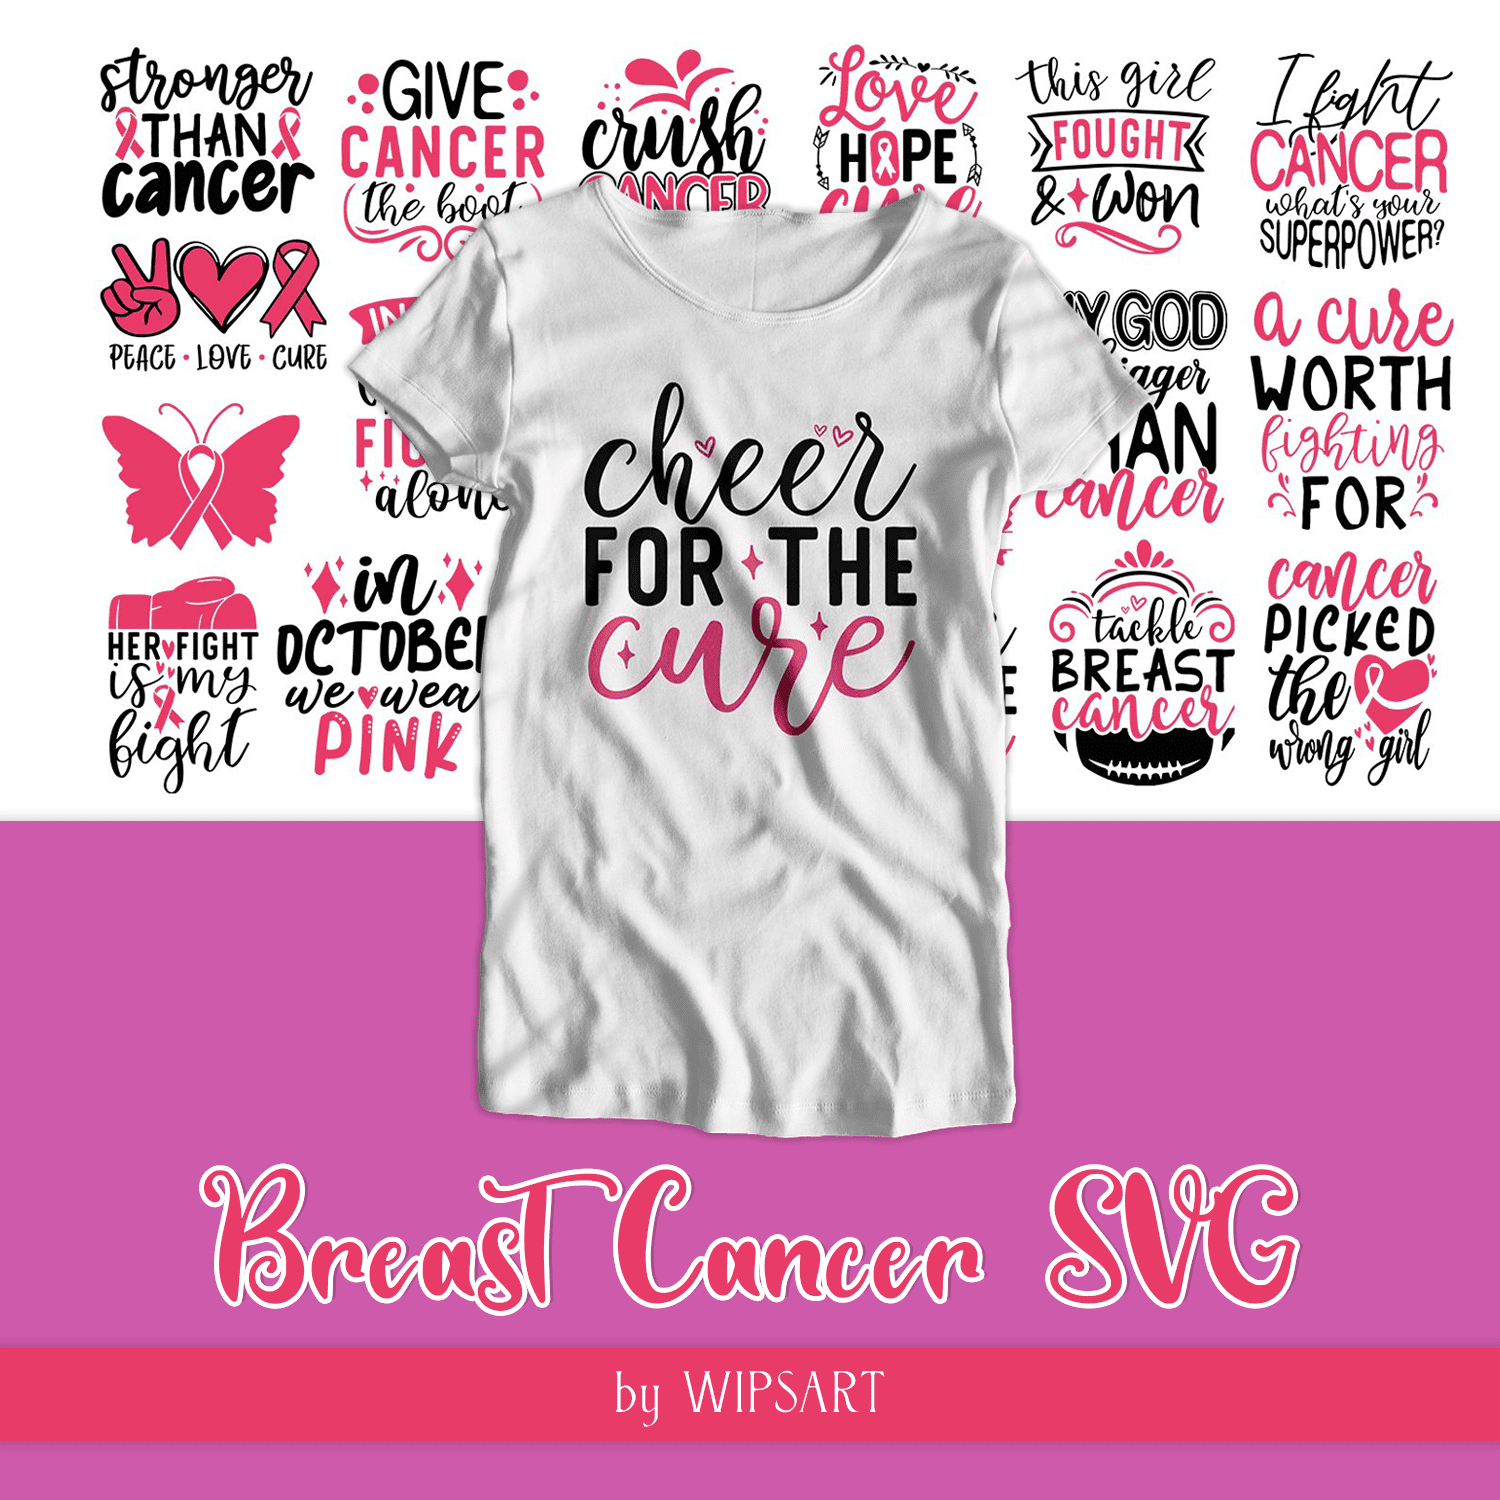 Breast Cancer SVG Awareness Quotes Bundle cover.